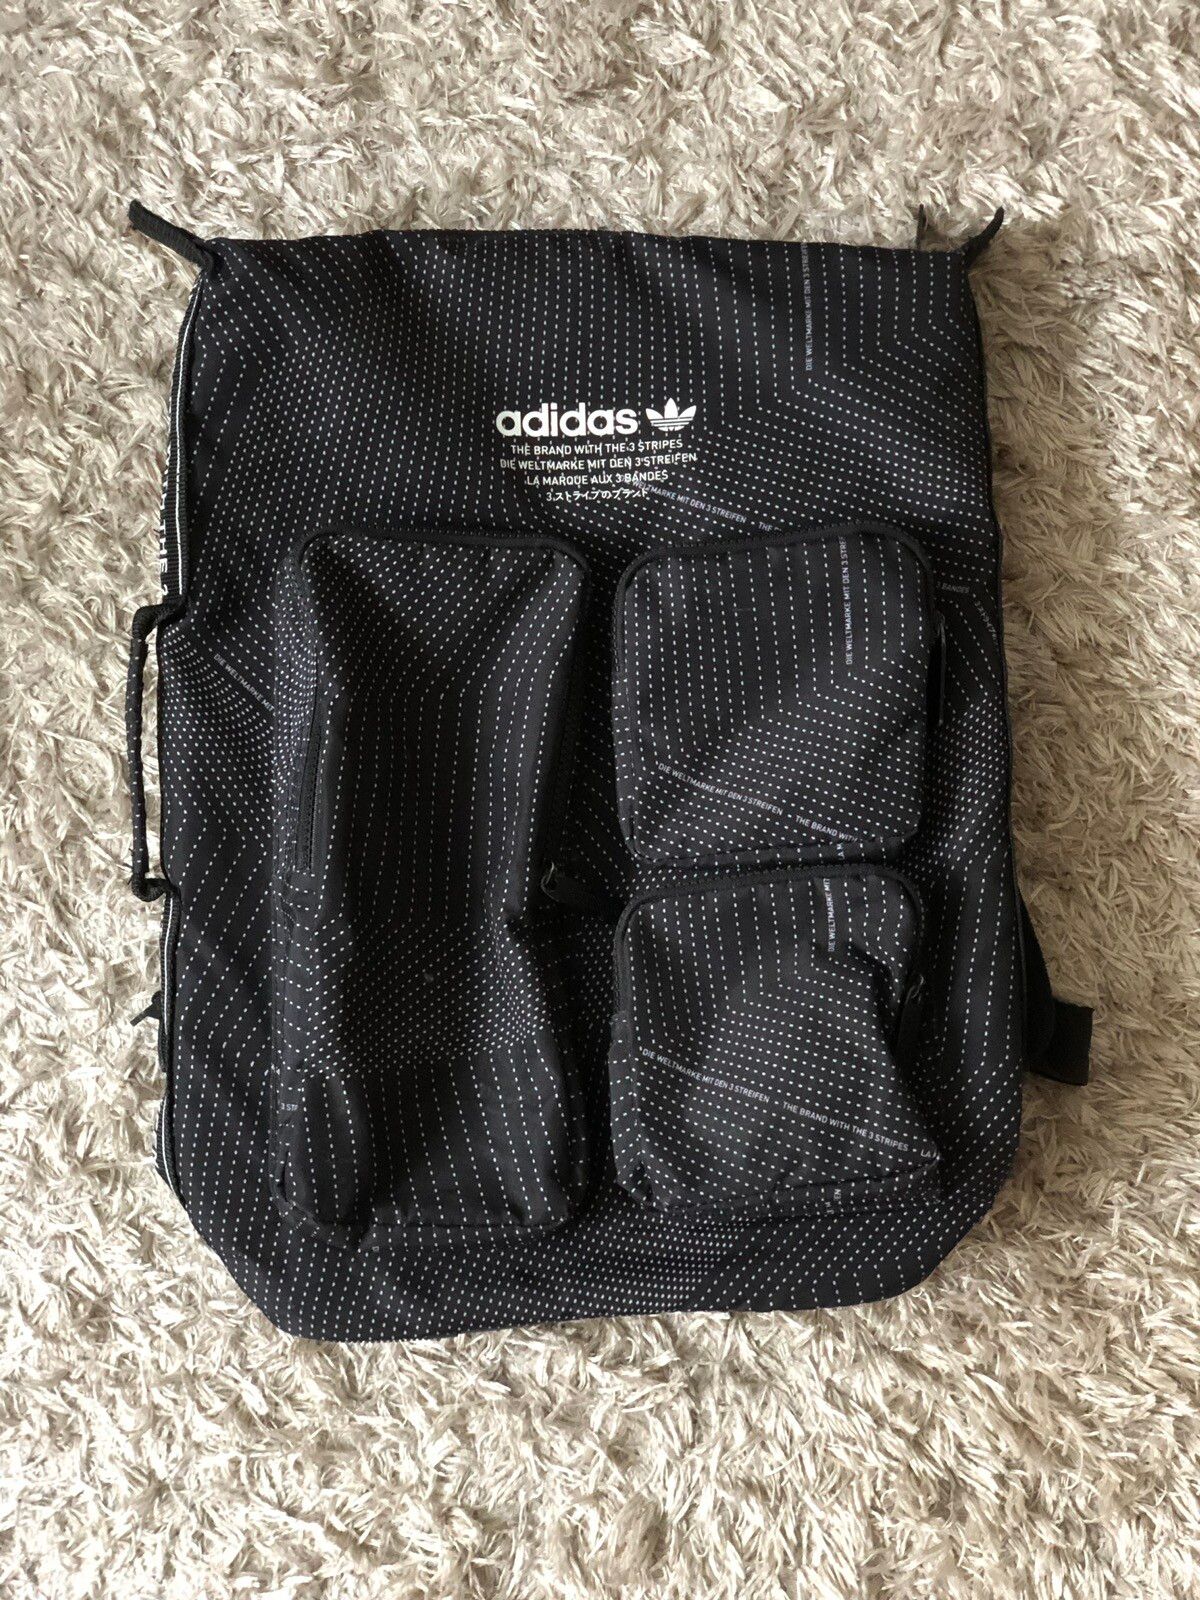 Adidas NMD Backpack Size ONE SIZE - 4 Preview